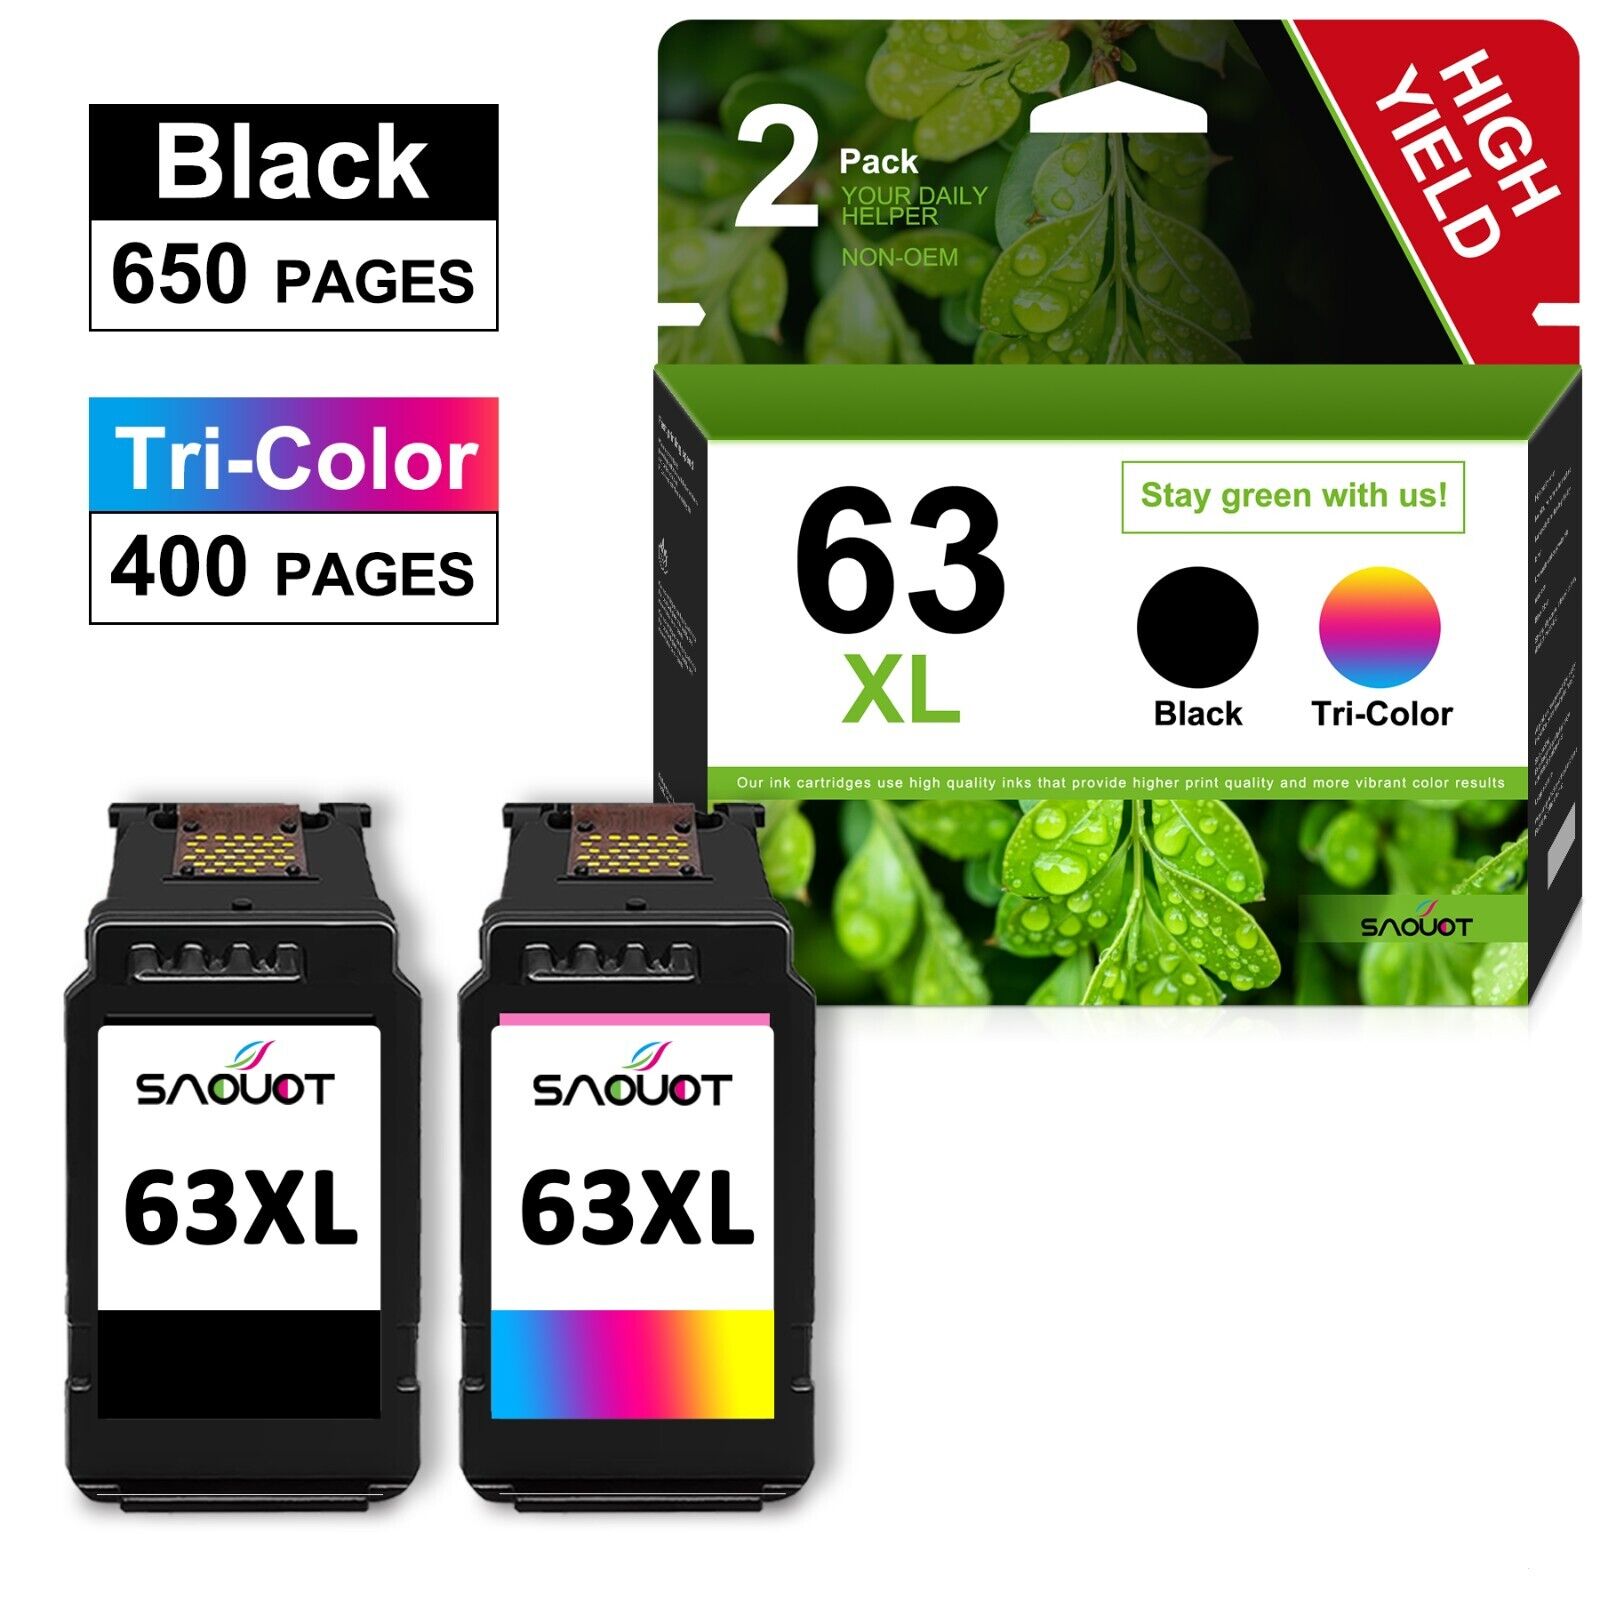 63XL Ink Cartridge Replacement for HP DeskJet 3631 3632 3633 1112 2130 2132 3630